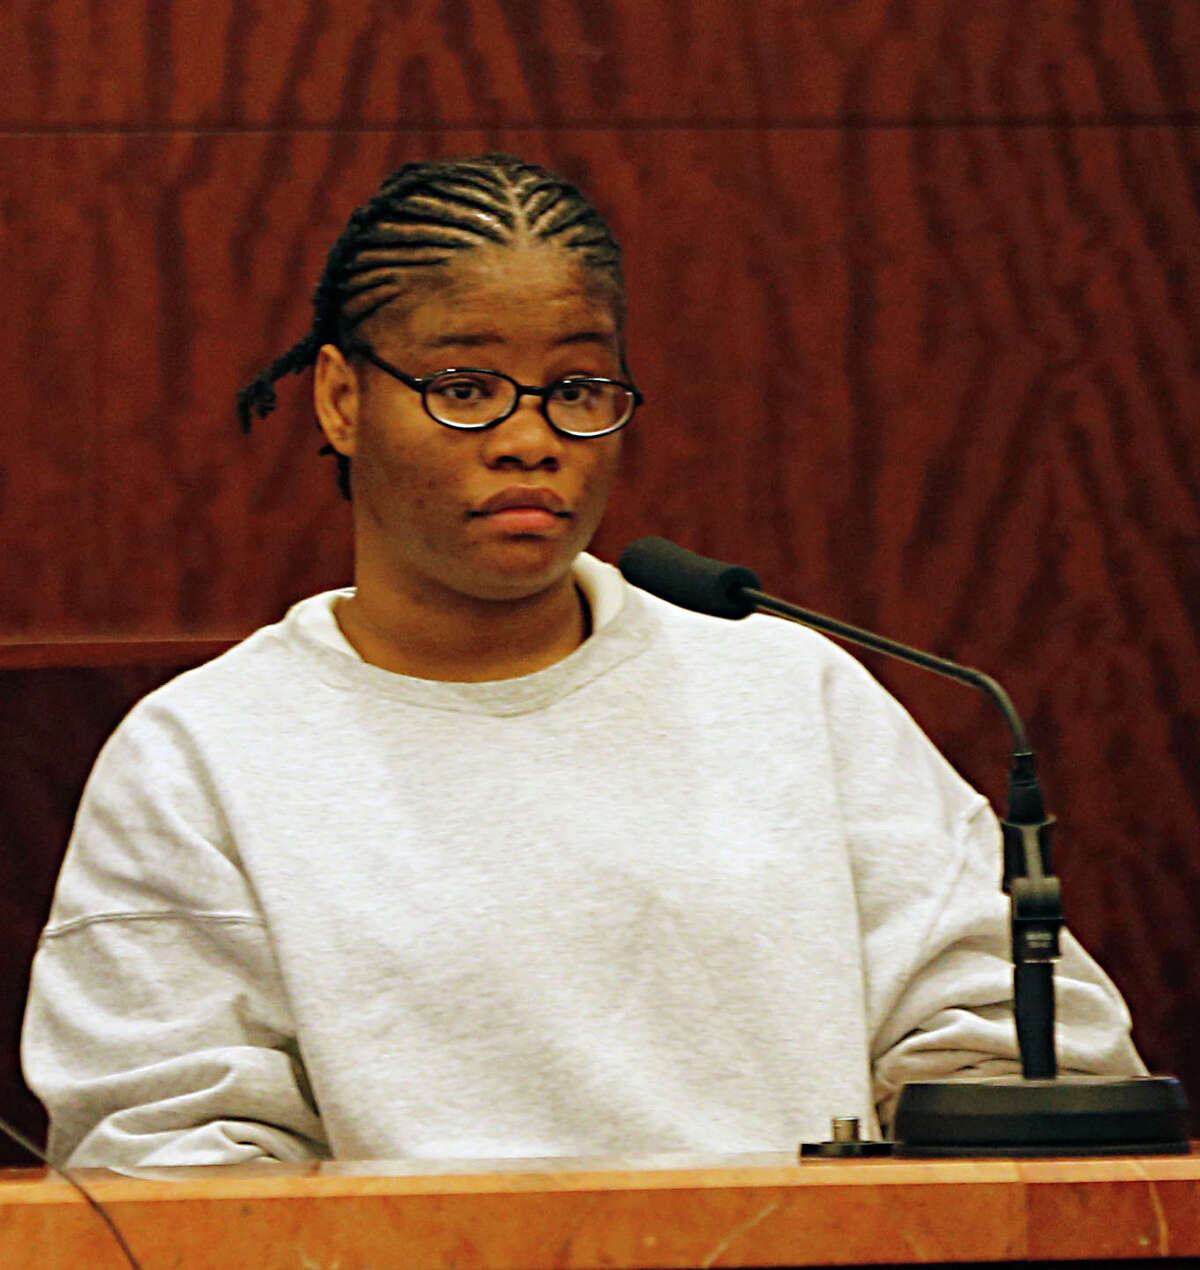 Ashley Nicole Richards testifies in 208th State District Criminal Court during the punishment phase of Kelly Jo Ivey's trial after Ivey was convicted of Intoxication Manslaughter in the death of Harris County Sheriff Deputy Jesse "Trey" Valdez, III Friday, Sept. 11, 2015, in Houston. Richards, 24, who has plead guilty to four counts of creating animal crush videos in an unrelated case.